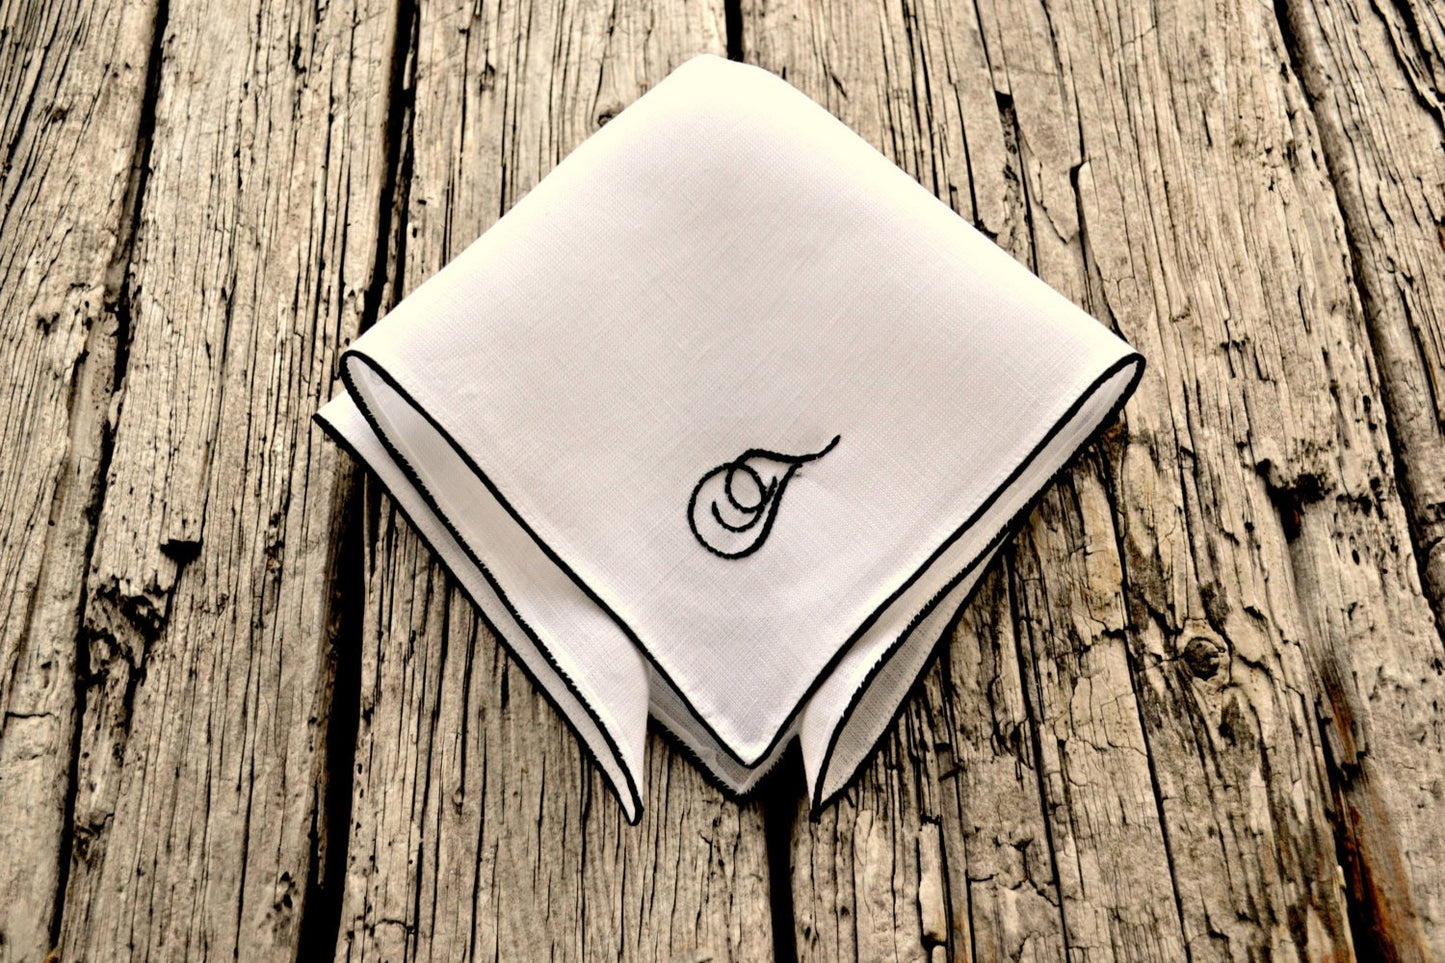 White linen pocket square with satin border in black and script letter T